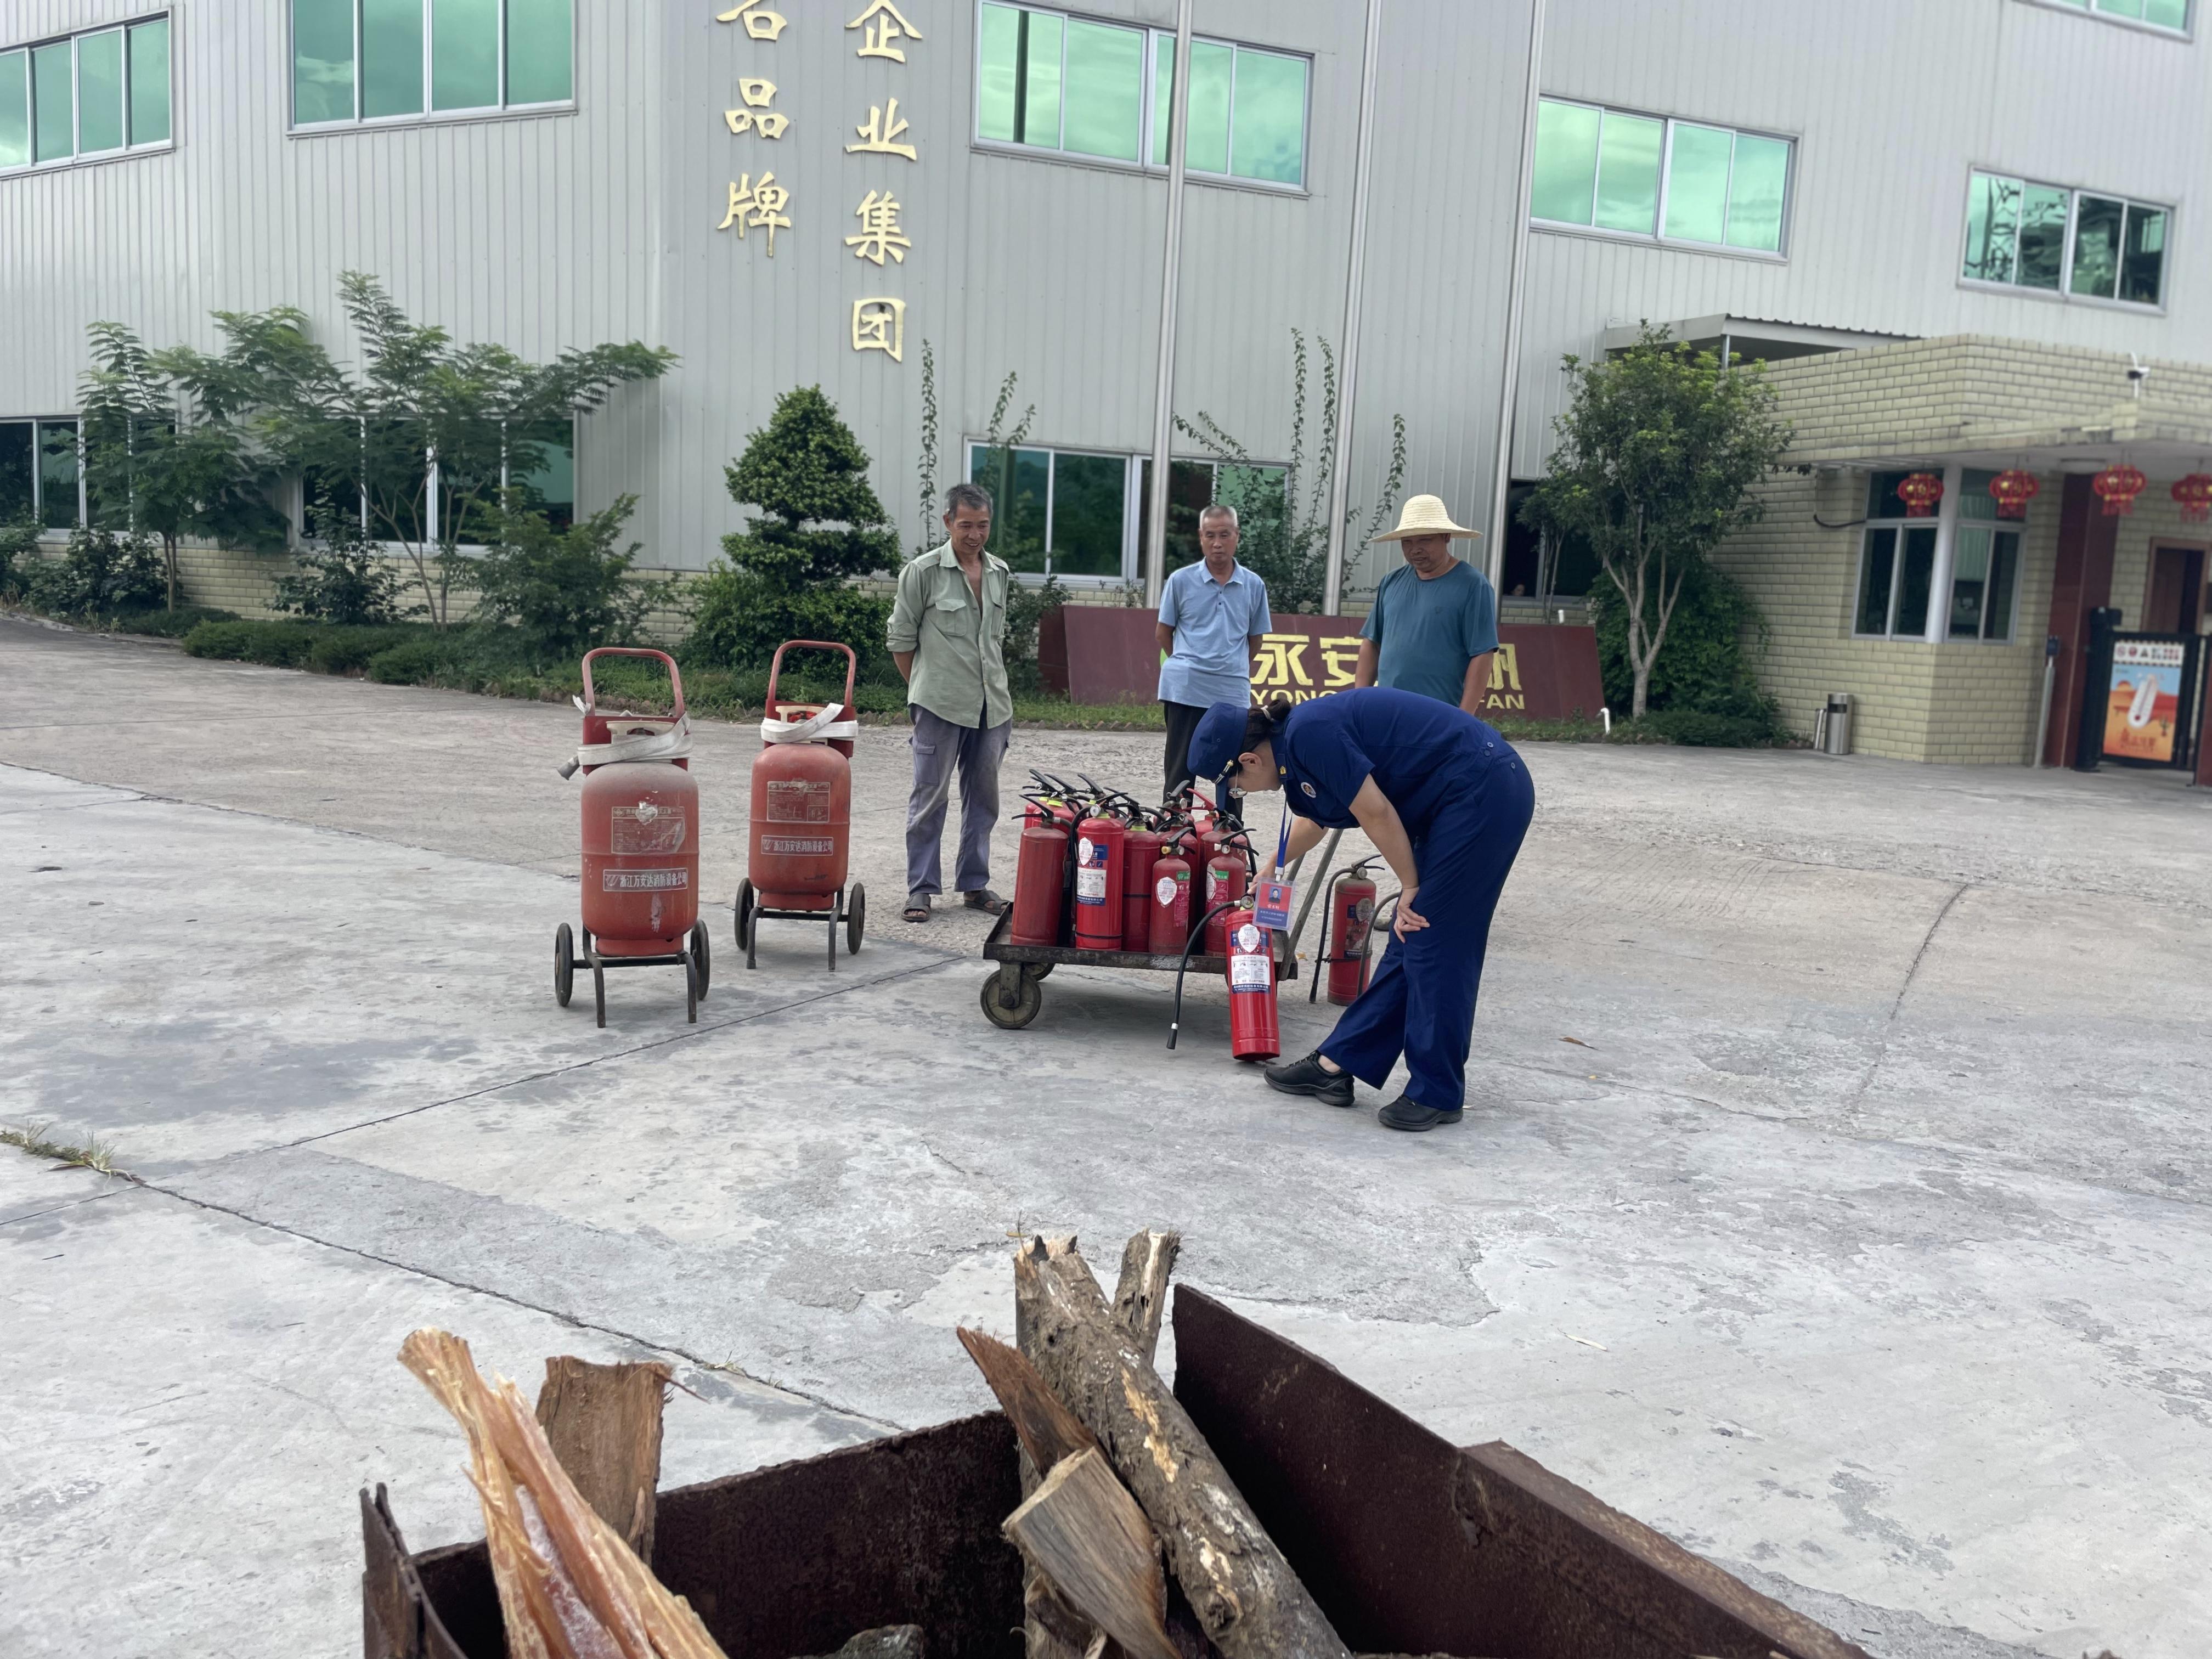 Yonglian Spices carried out high temperature fire safety training